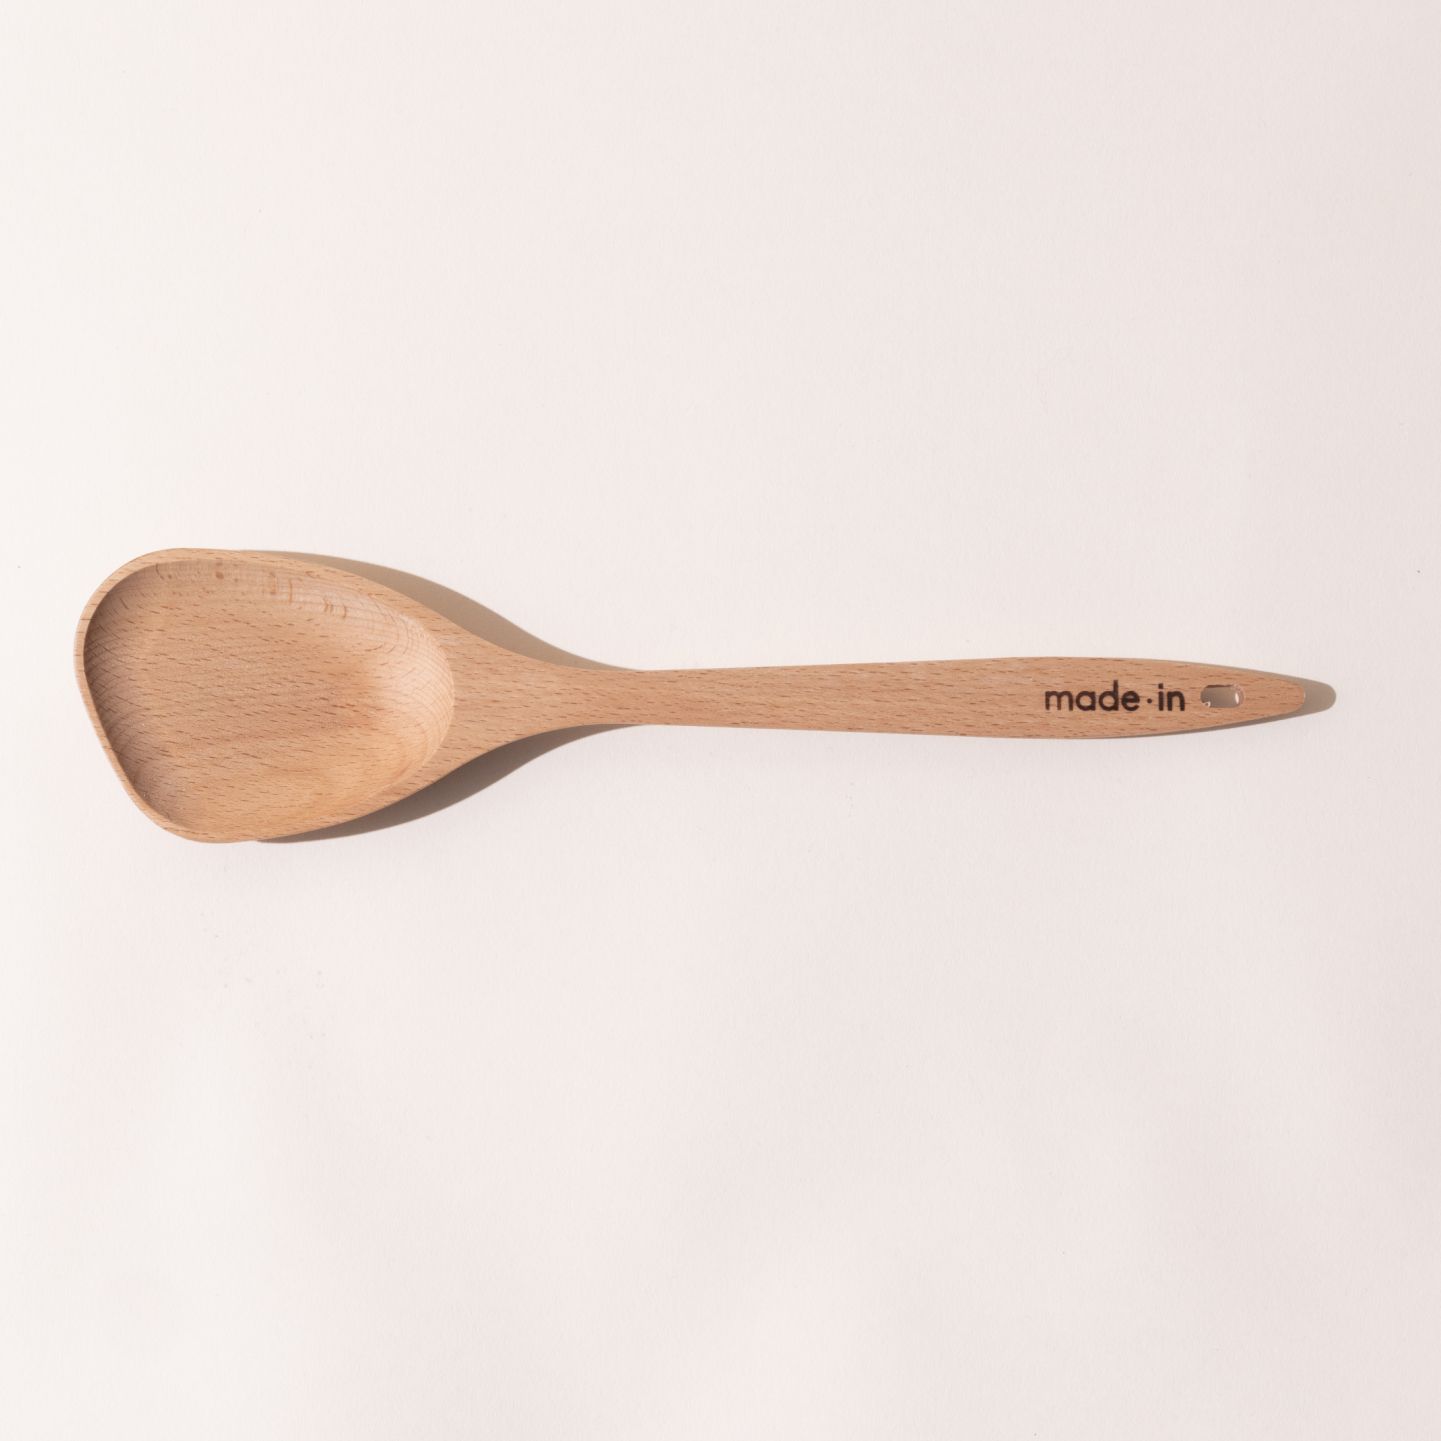 Pros & Cons of Wooden Spoons & All Other Spoons